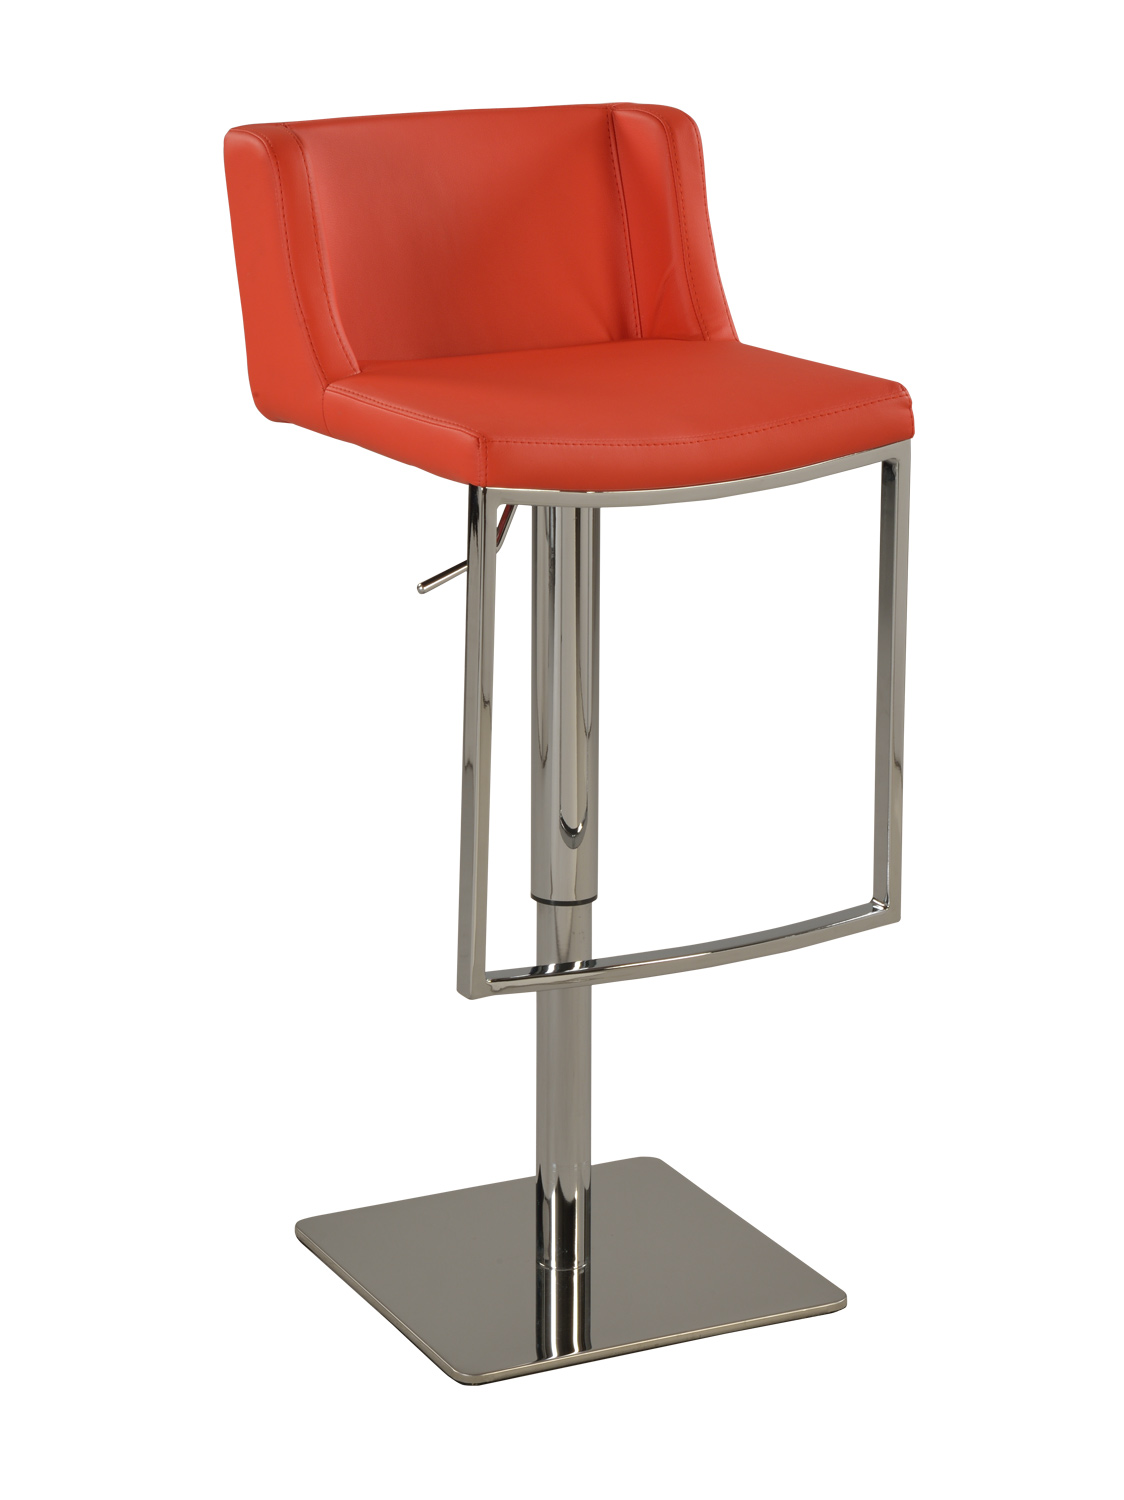 Chintaly Imports 0886 Pneumatic Gas Lift Adjustable Height Stool - Chrome